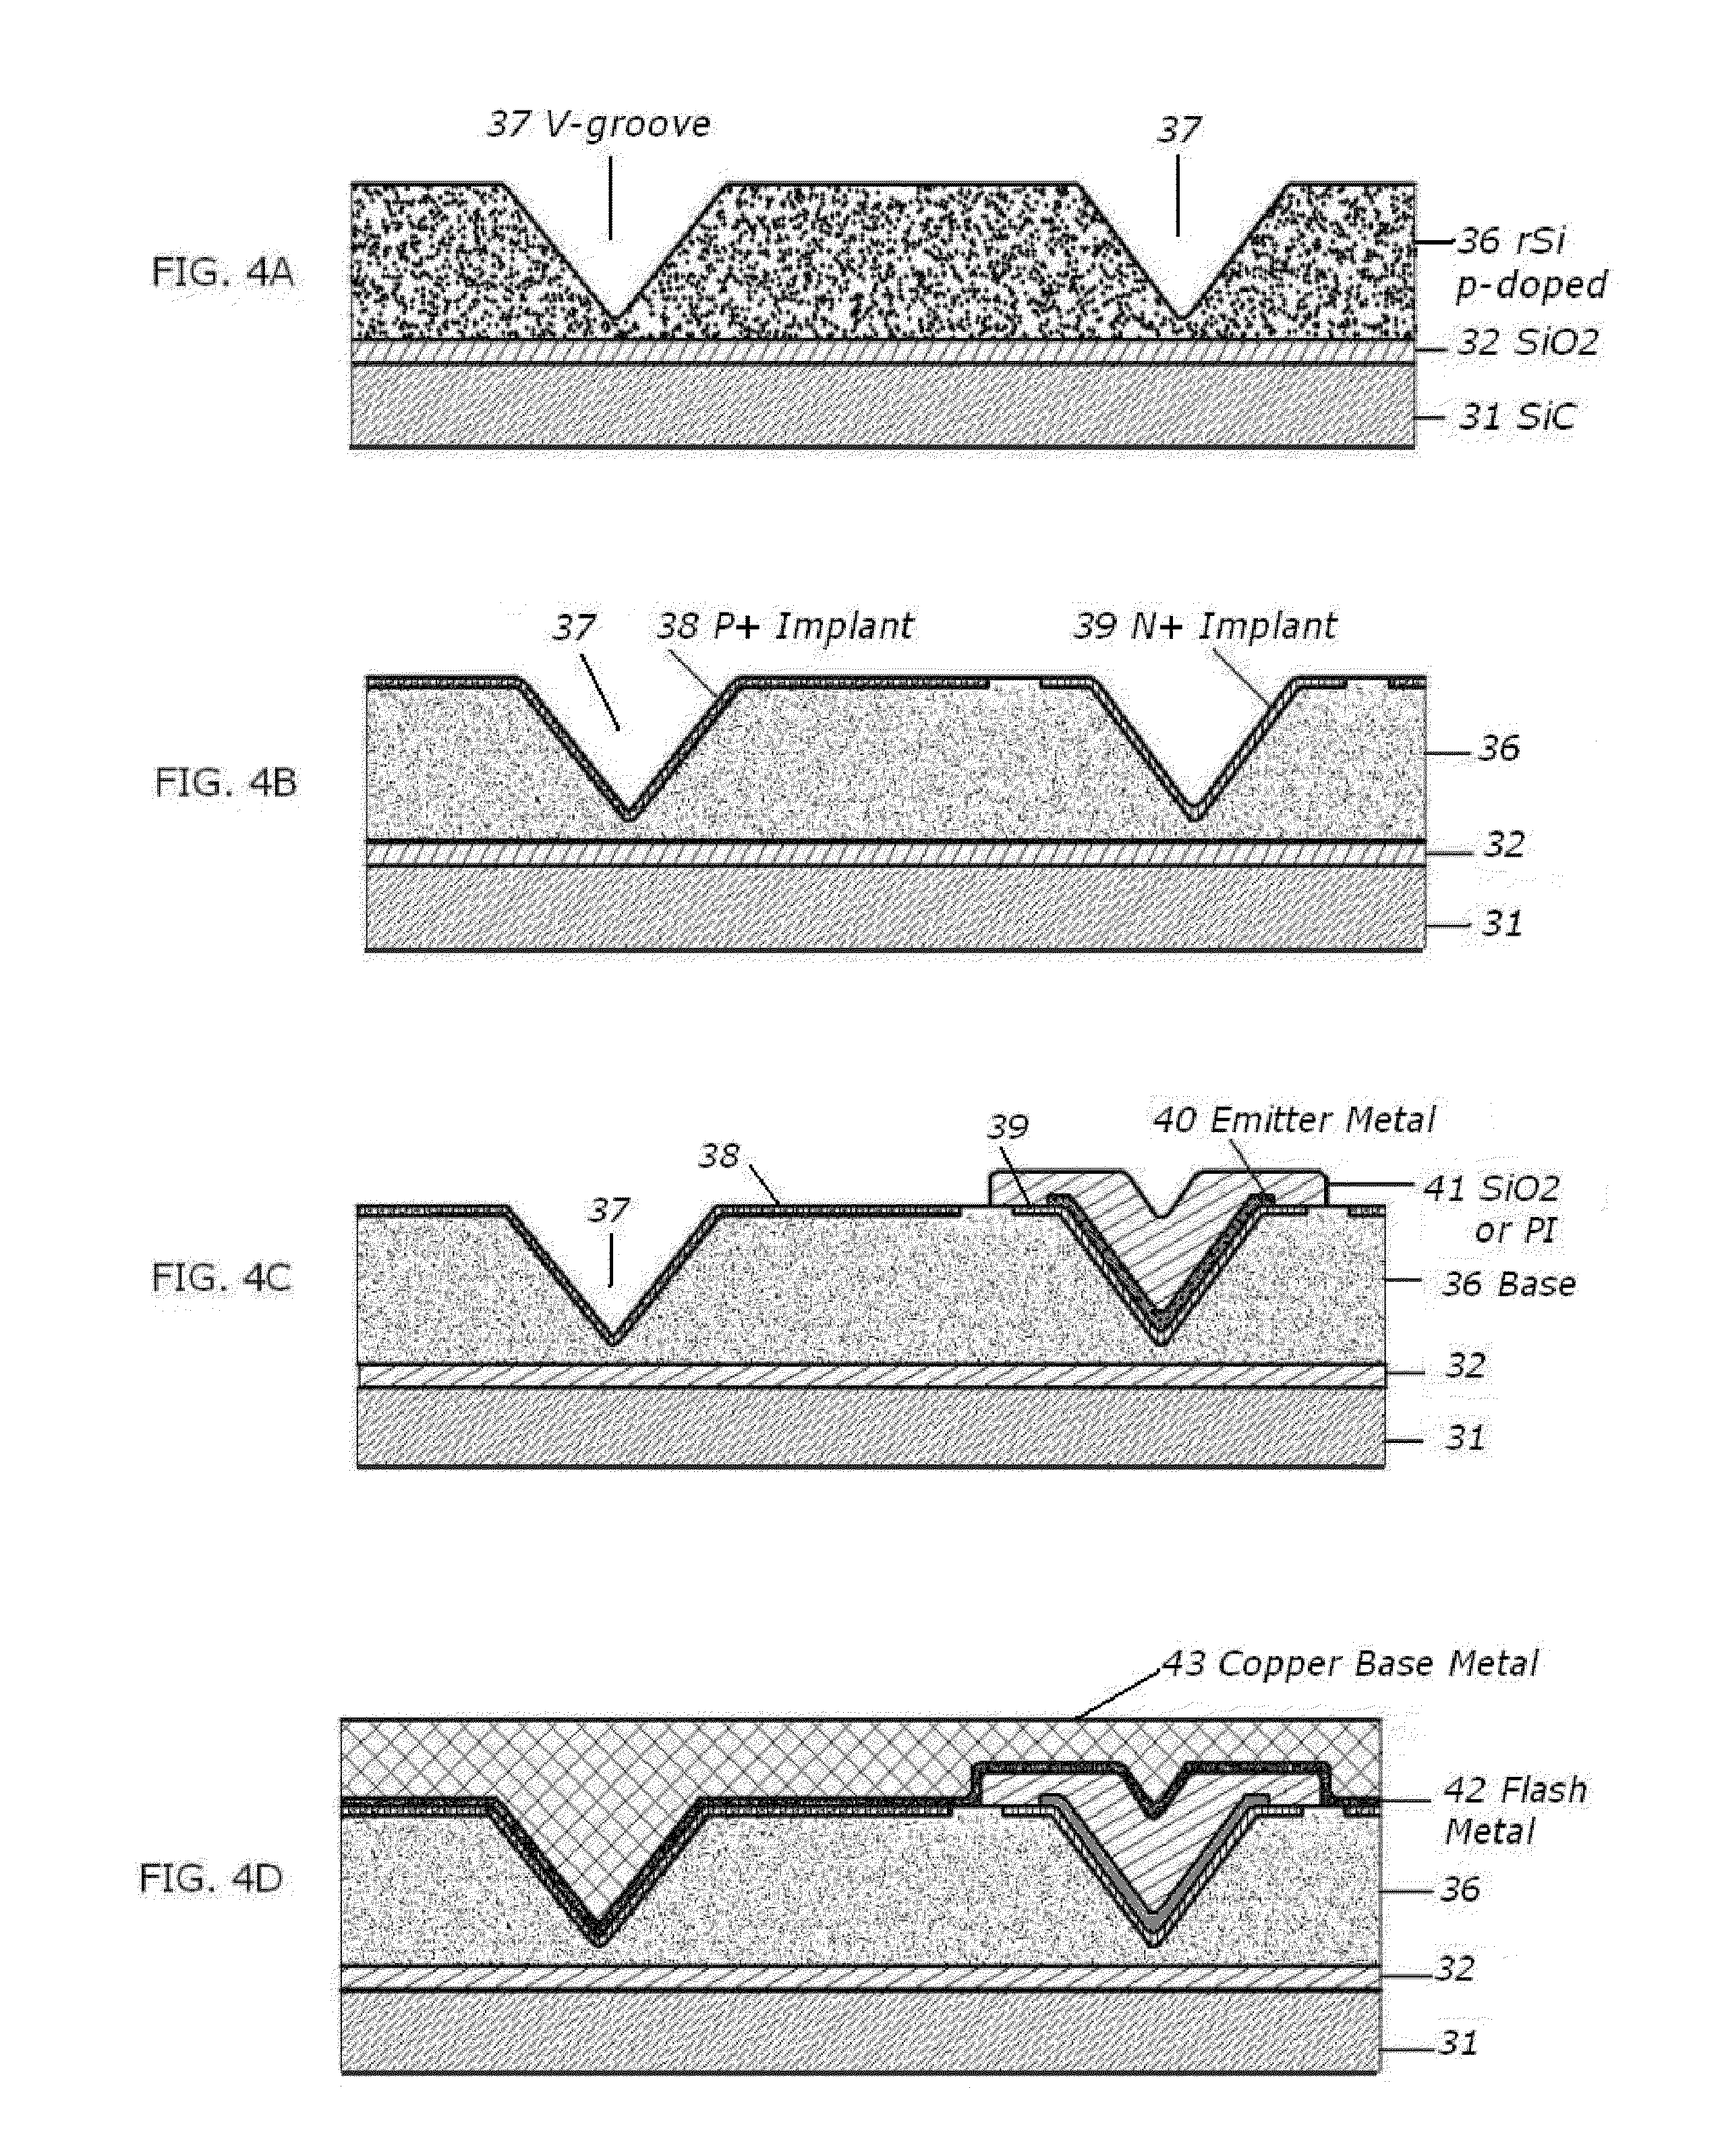 Method for production of thin semiconductor solar cells and integrated circuits